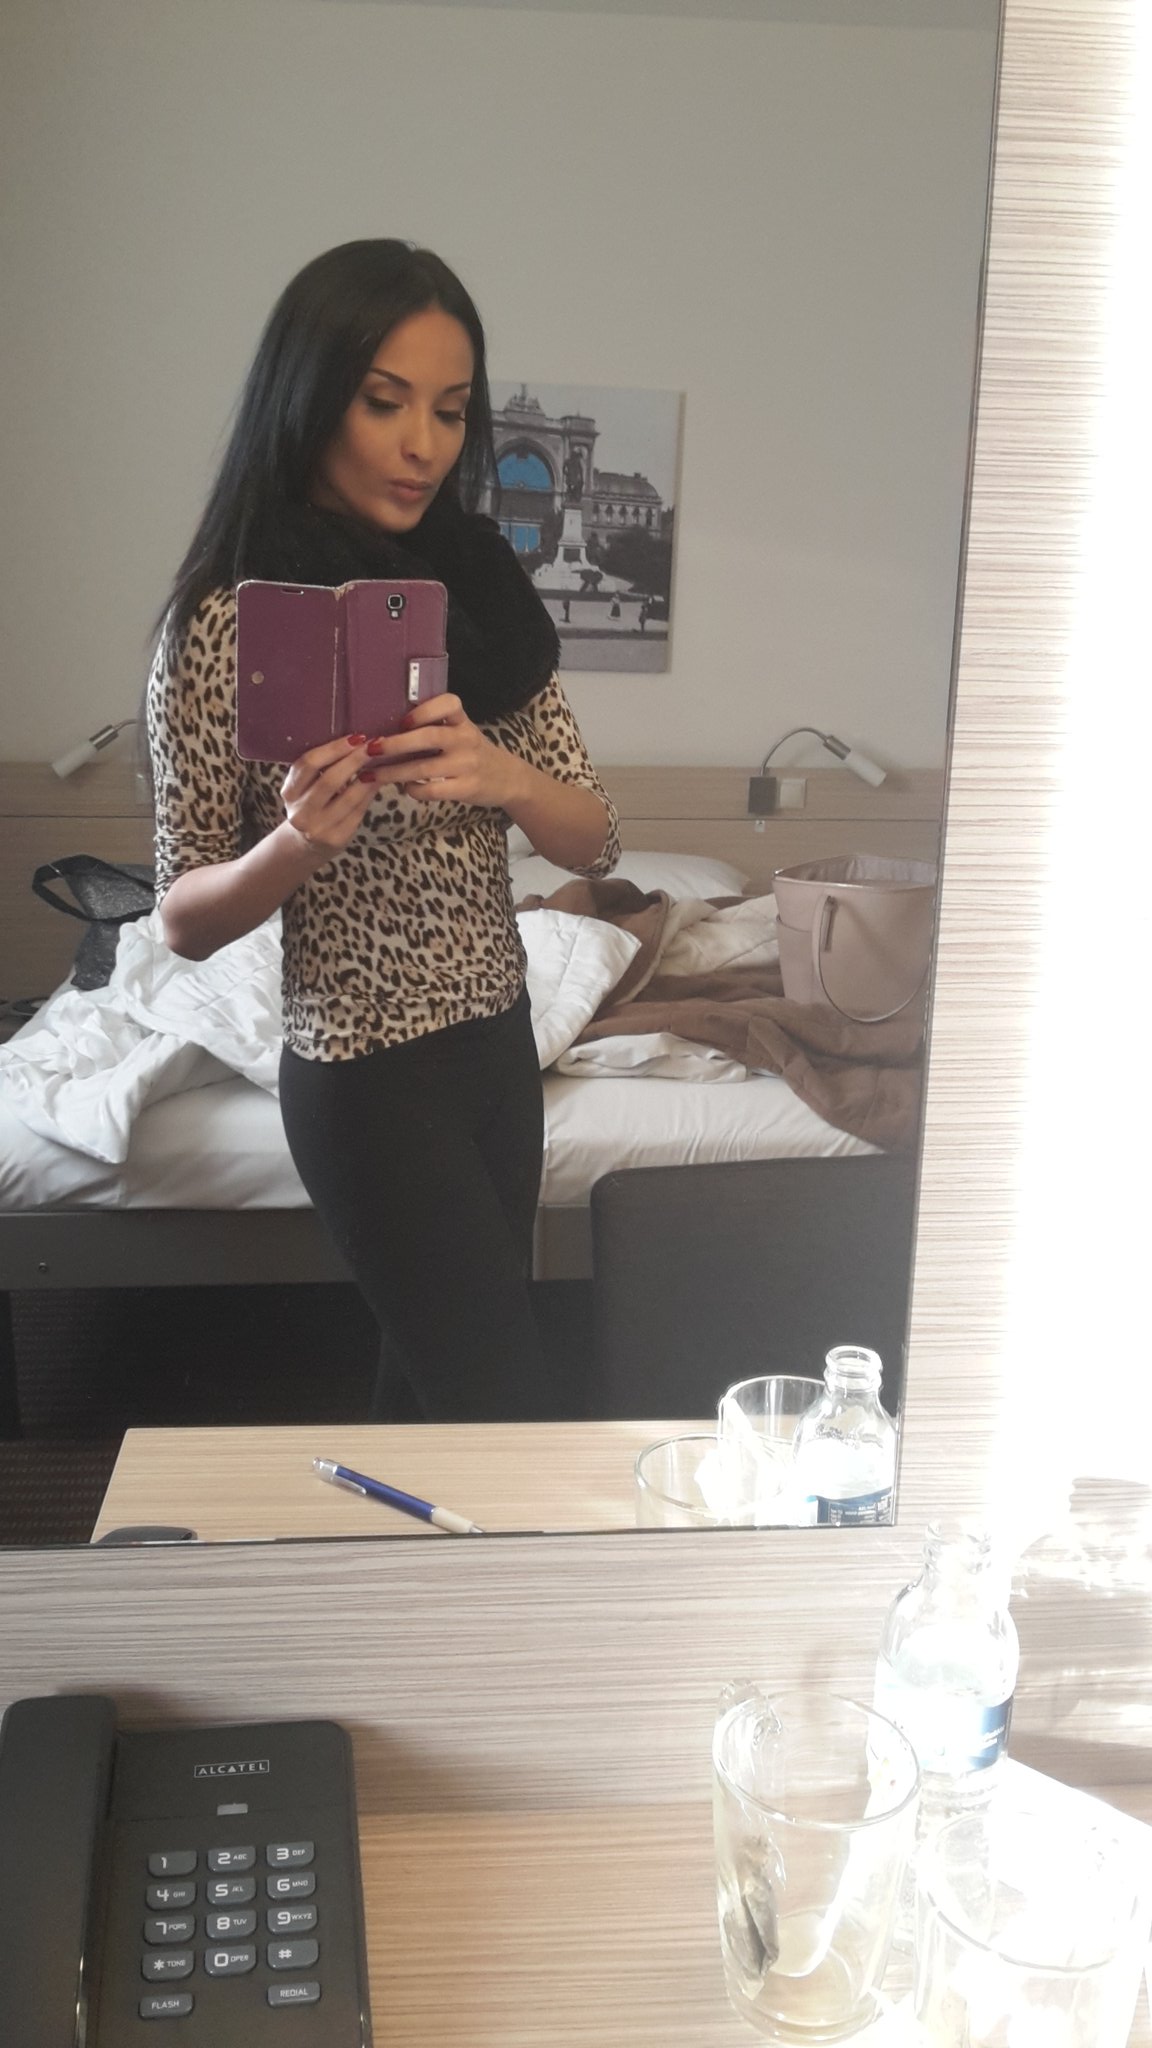 Tw Pornstars Anissa Kate Twitter Good Morning From Budapest Busy Day Today Shooting